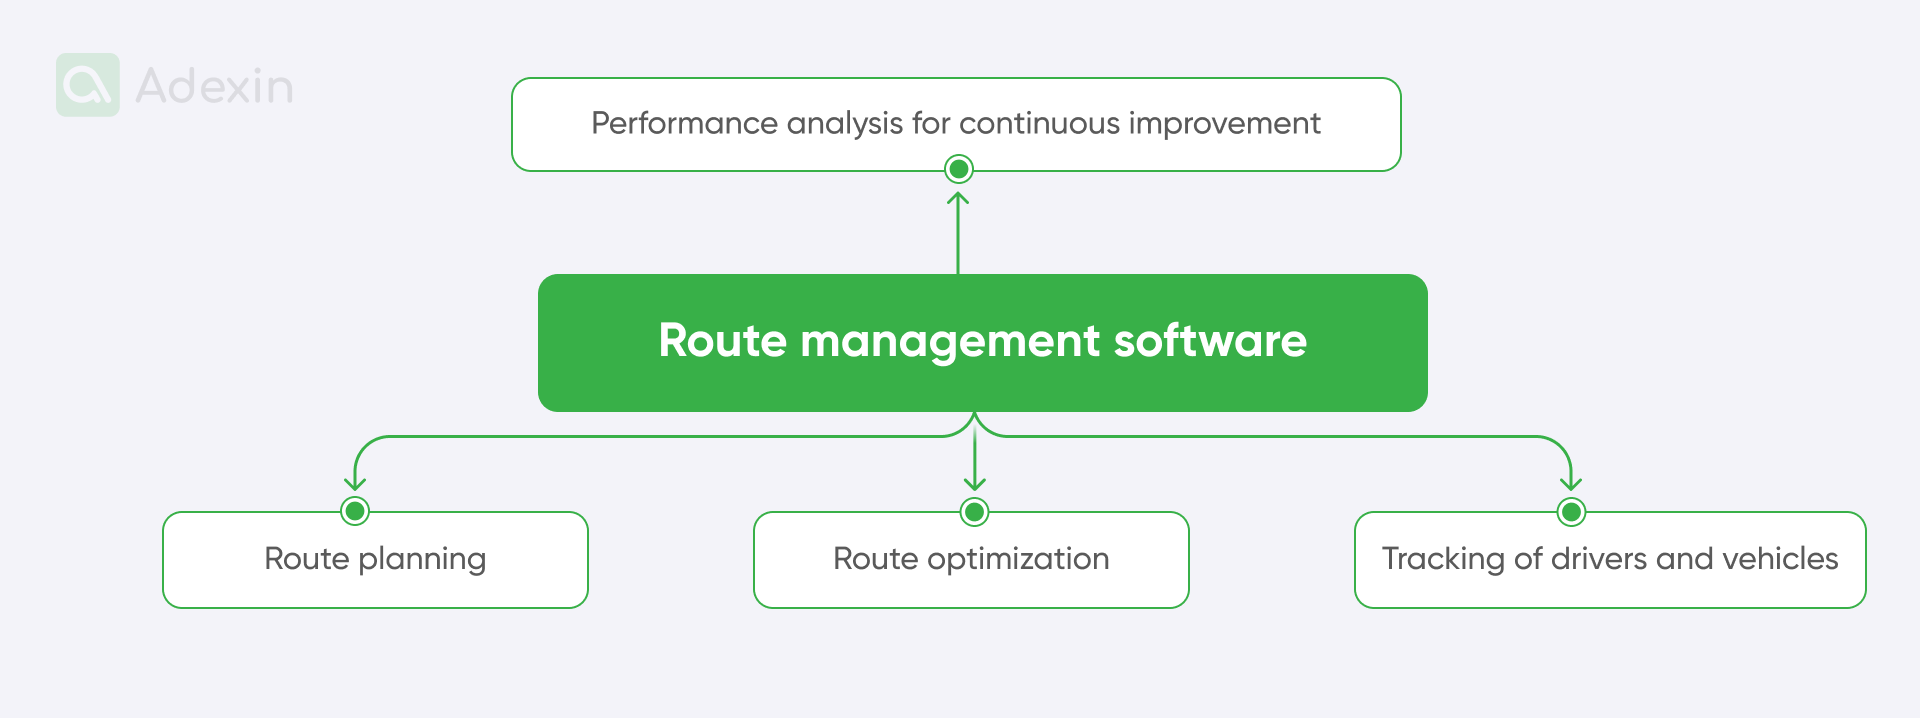 Areas to route management software solutions